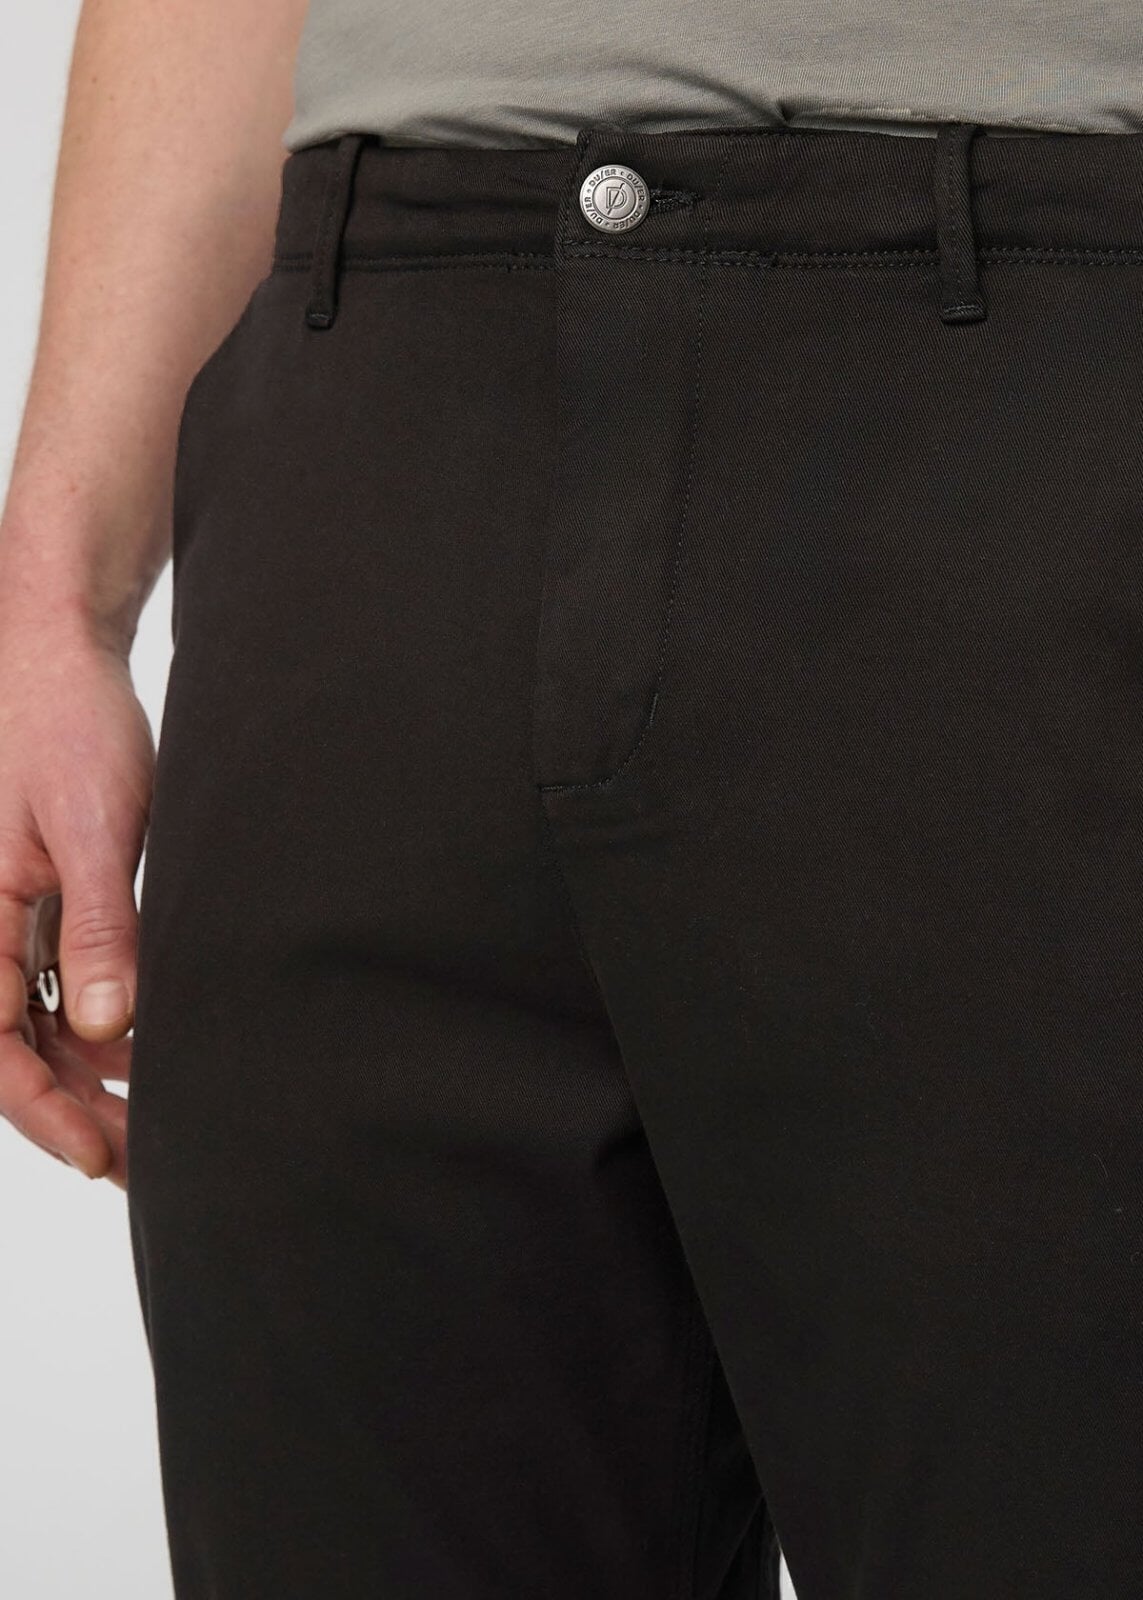 mens stretch black chino pants front waistband detail